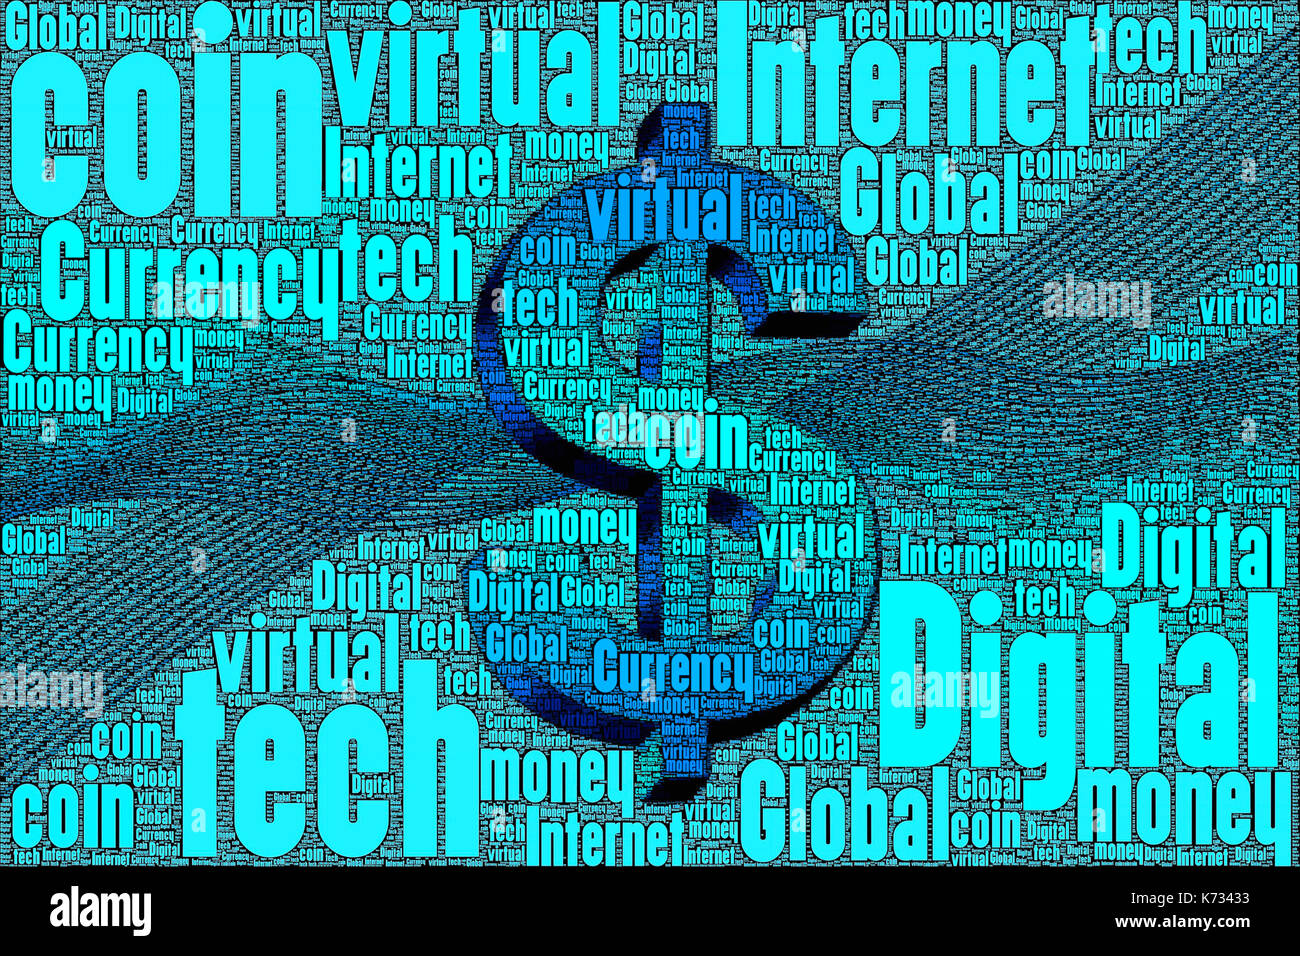 Digital virtual money bit coin concept made only from words about the subject. Stock Photo